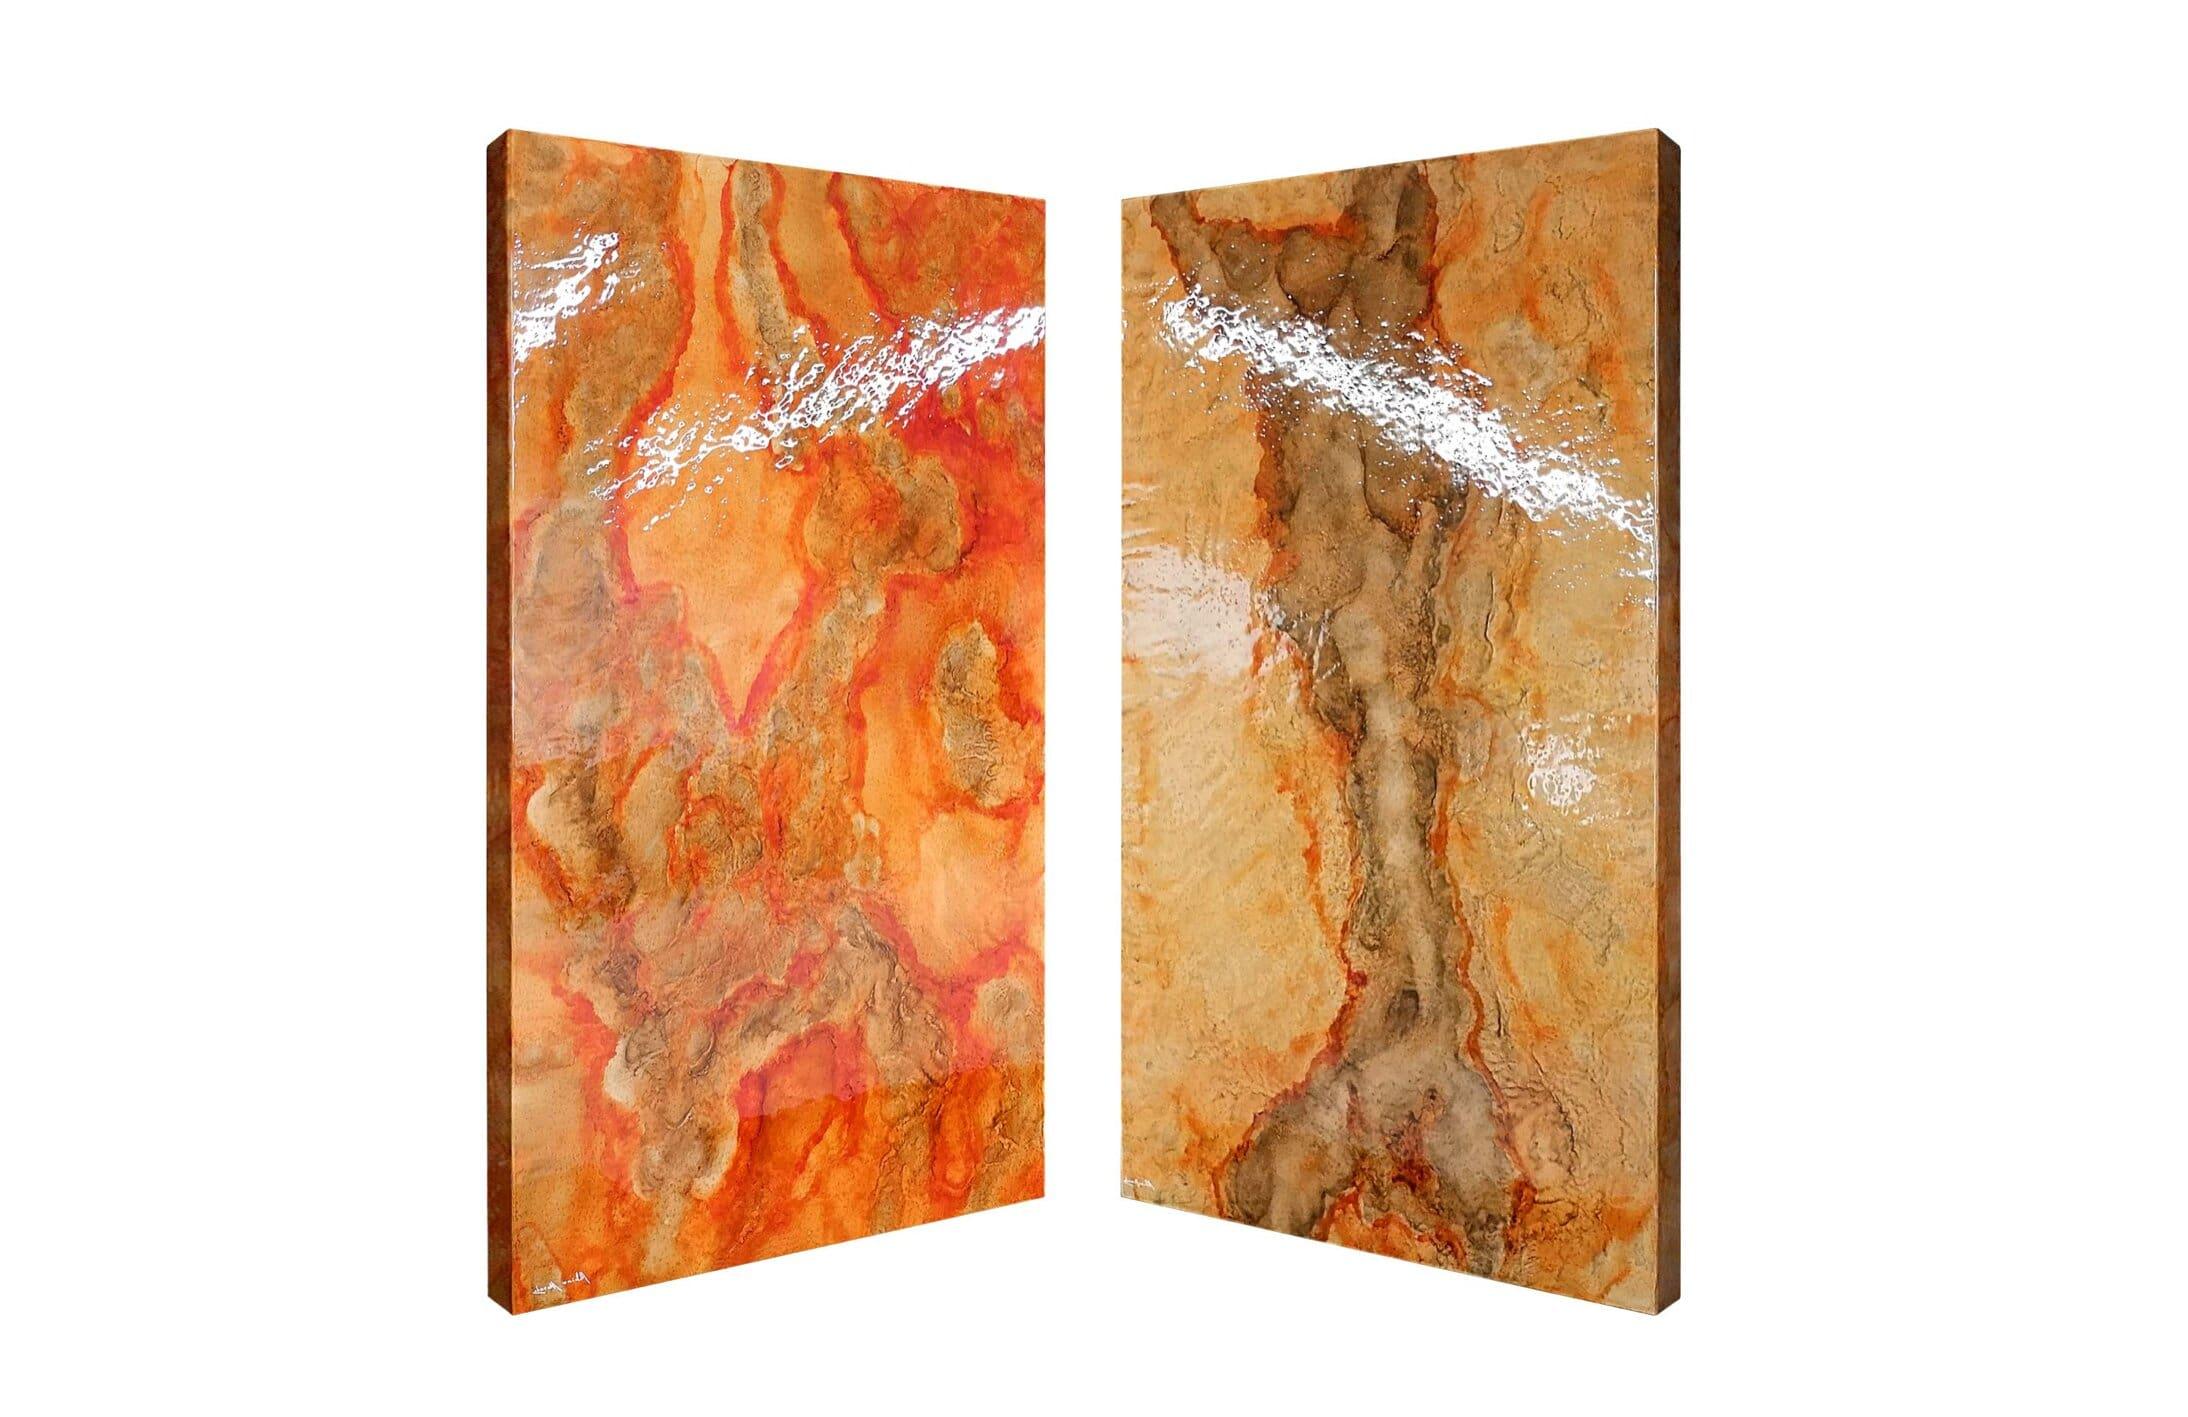 Wall panel

General Information
Dimensions (cm): 120 x 10 x 200
Dimensions (in): 47.2 x 3.9 x 78.7.

Materials and Colors
Structure: Wood reinforced with fiberglass, finished in translucent 